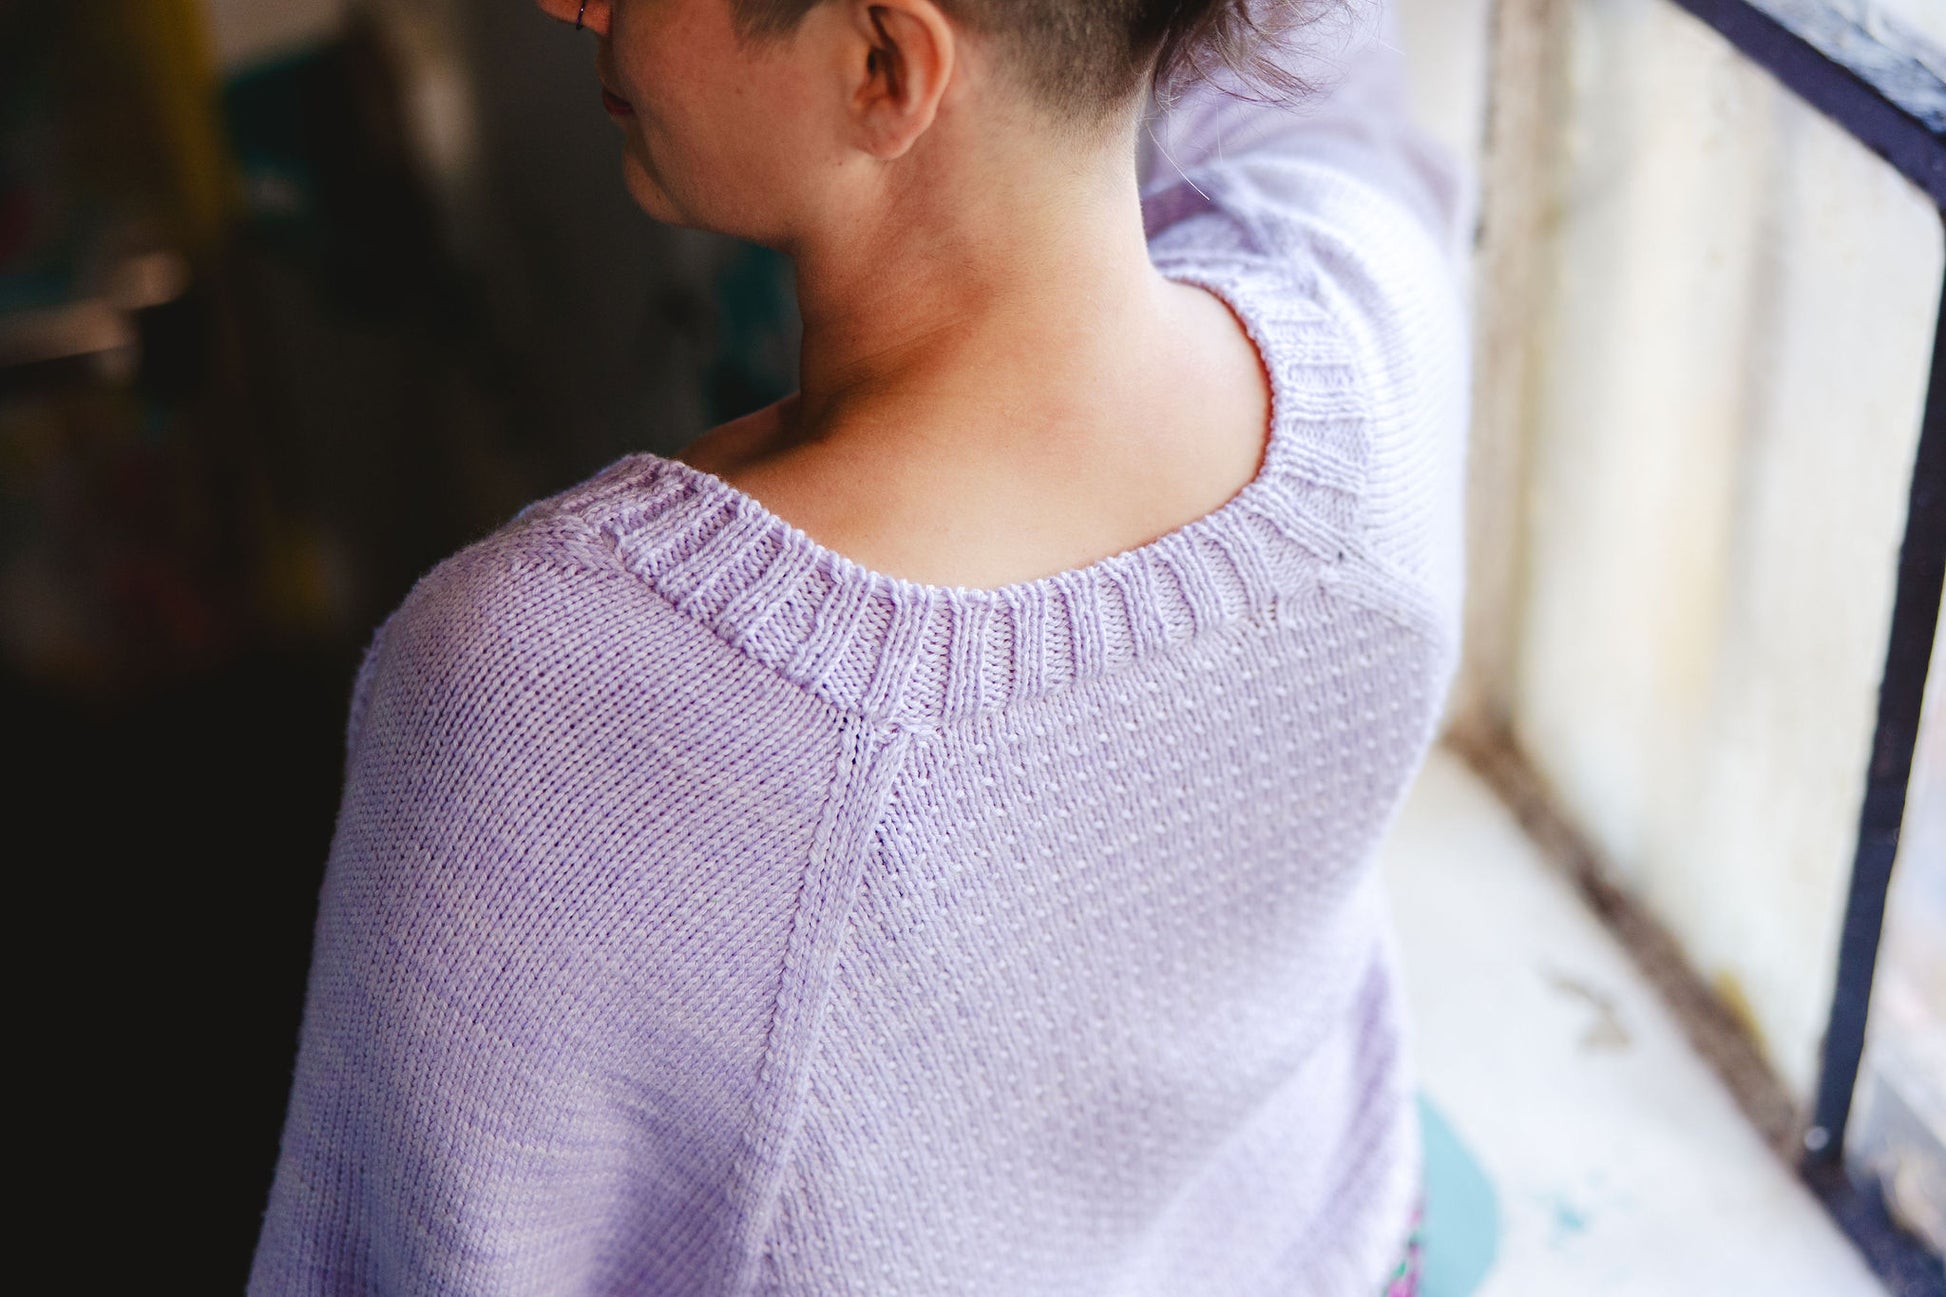 Seen from behind, Jen poses to show off the scooped back neckline of her light purple knit sweater.